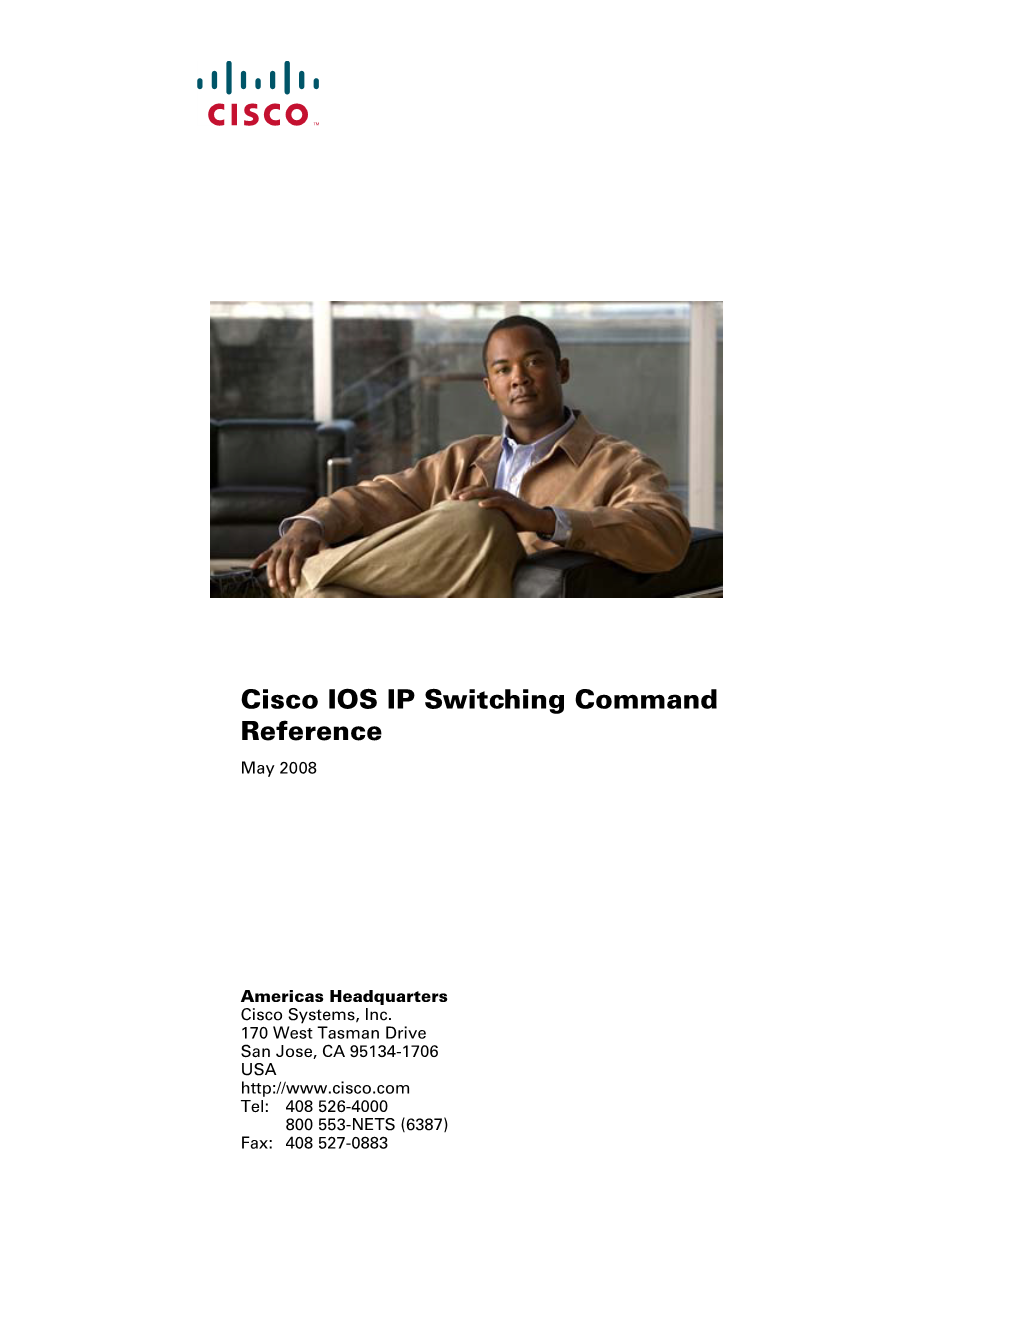 Cisco IOS IP Switching Command Reference May 2008